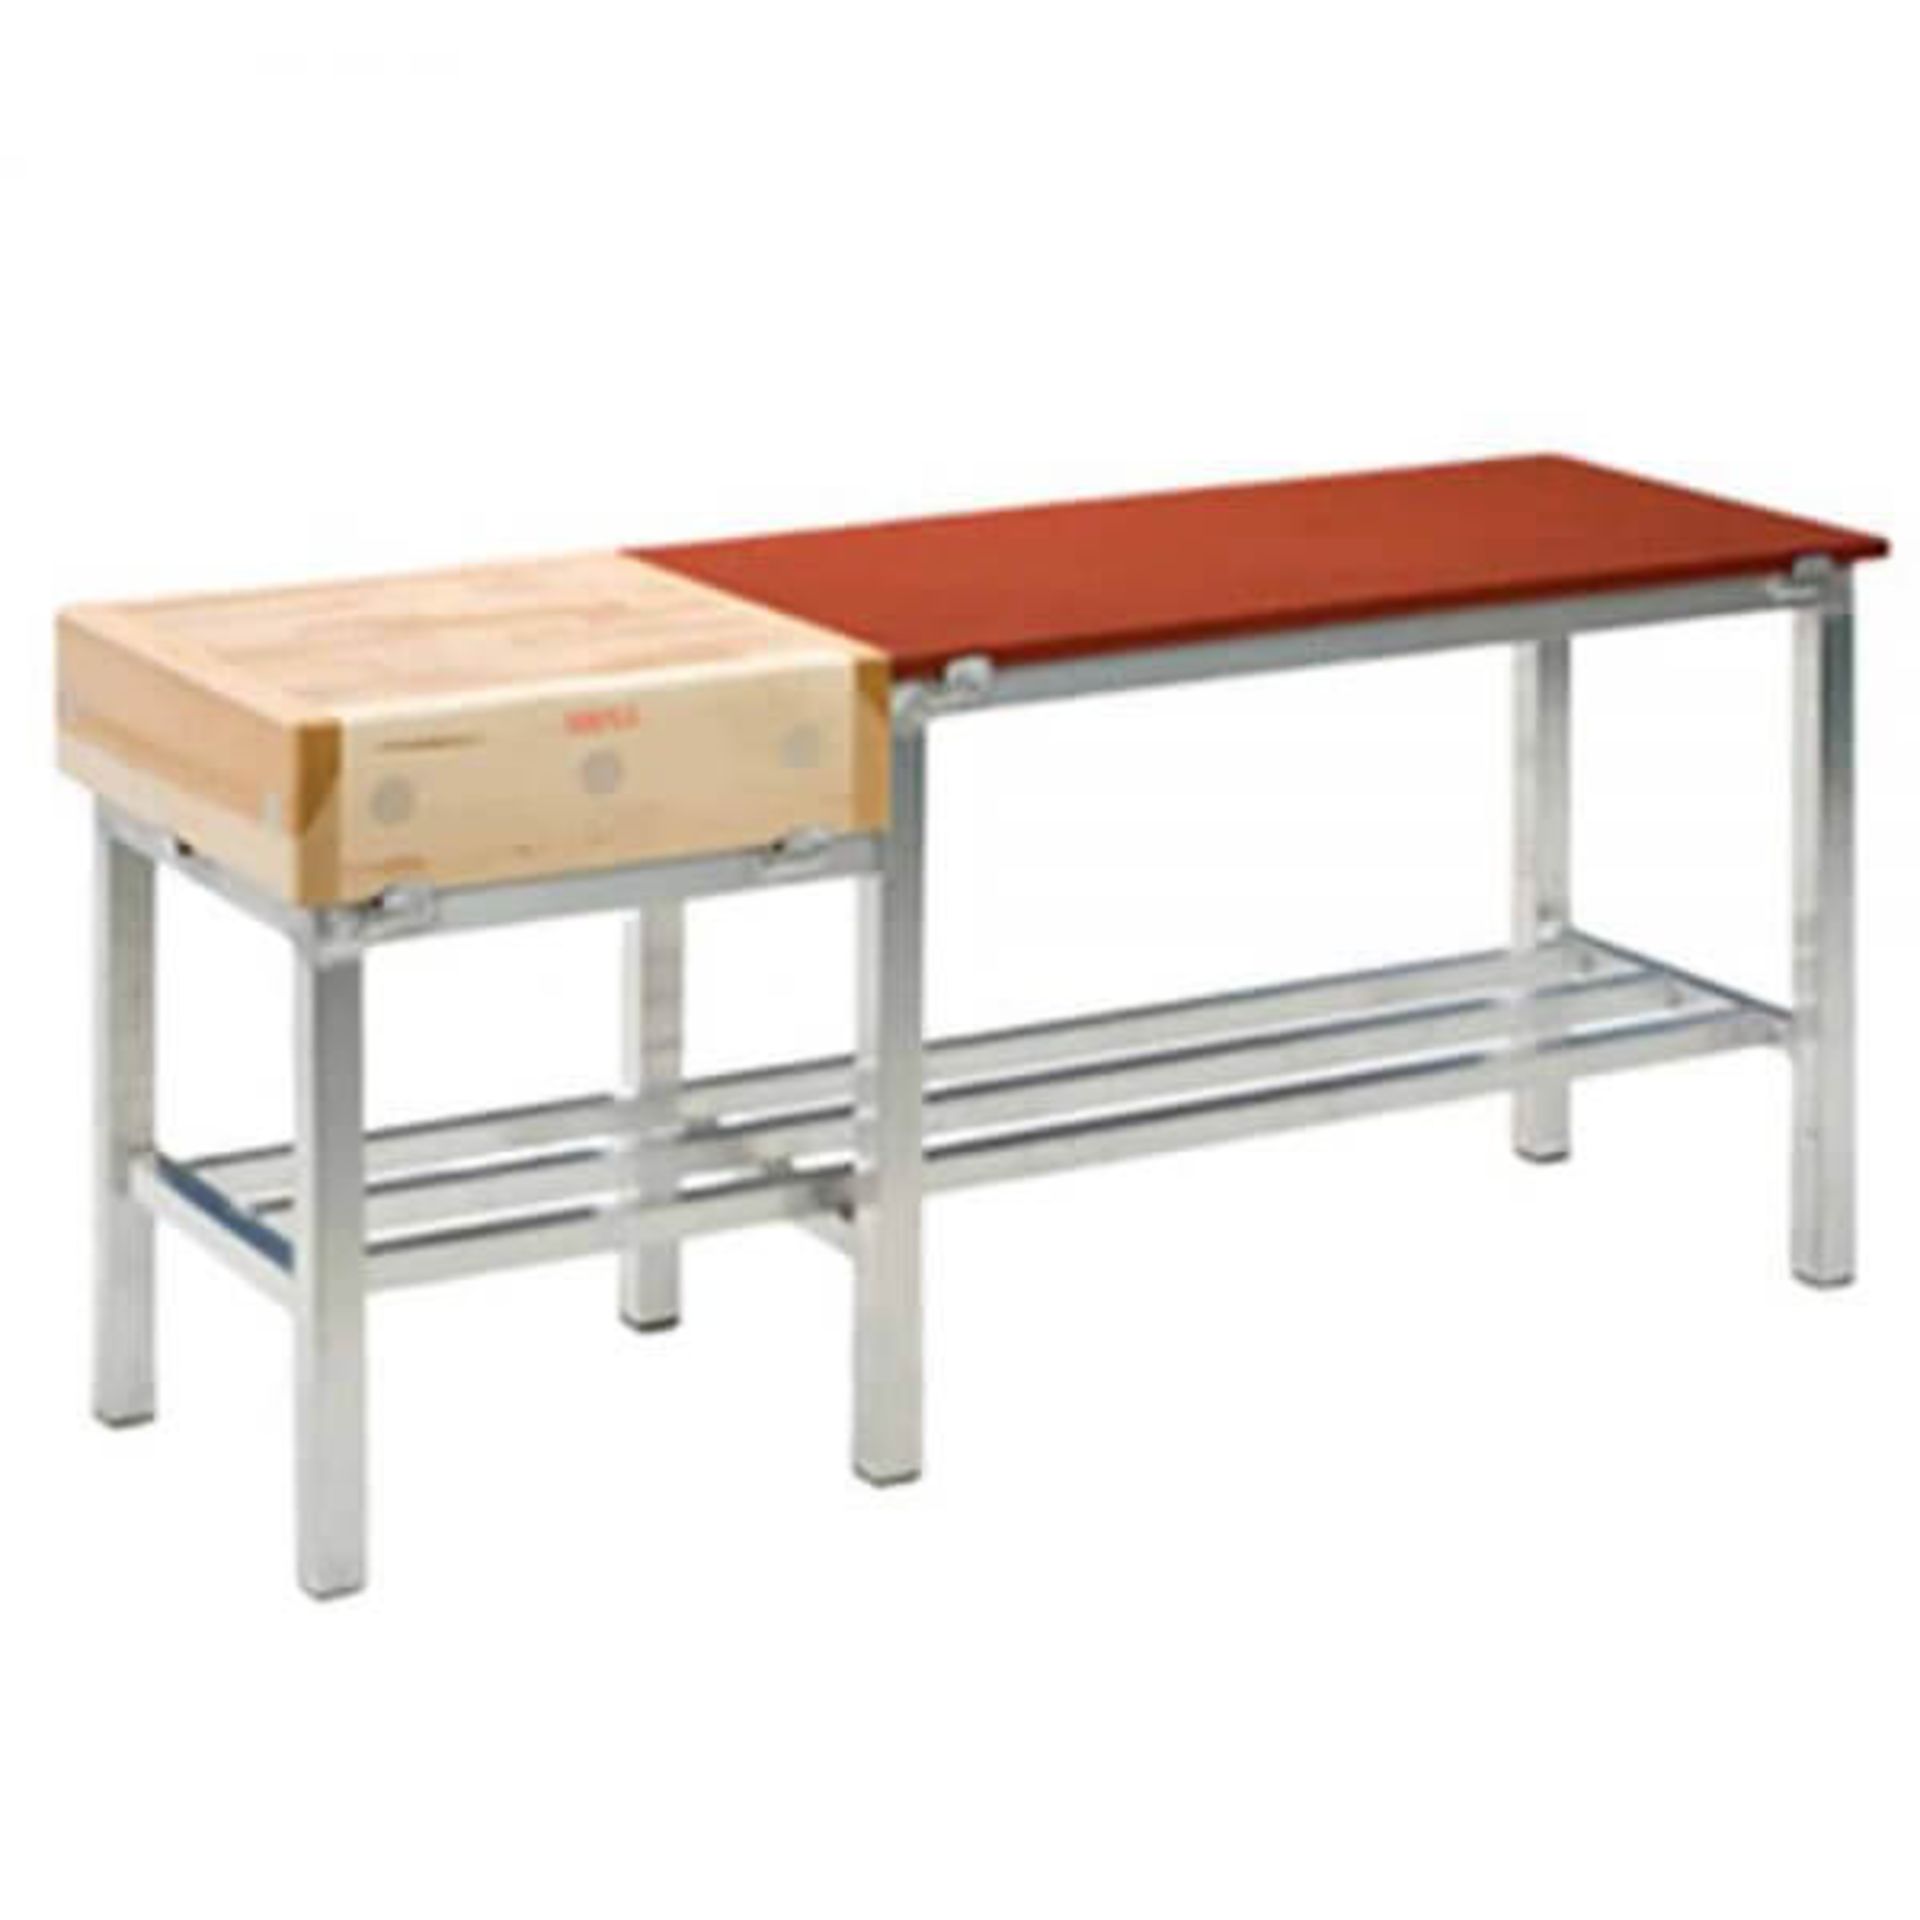 1 x Butchers Combination Block Featuring a Poly Cutting Table, Wooden Butchers Block and Stainless